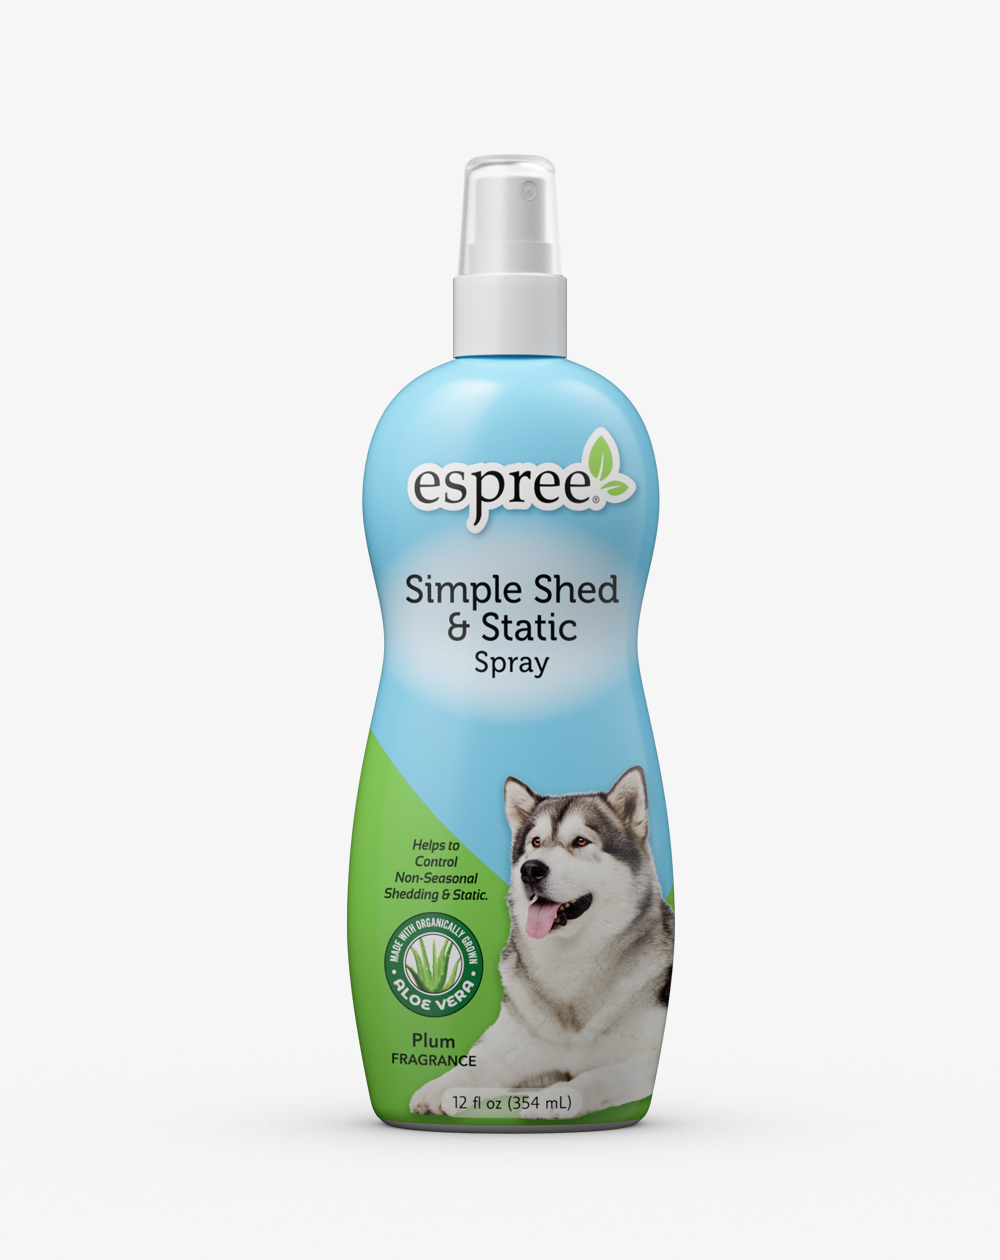 Espree Simple Shed & Static Spray for Dogs